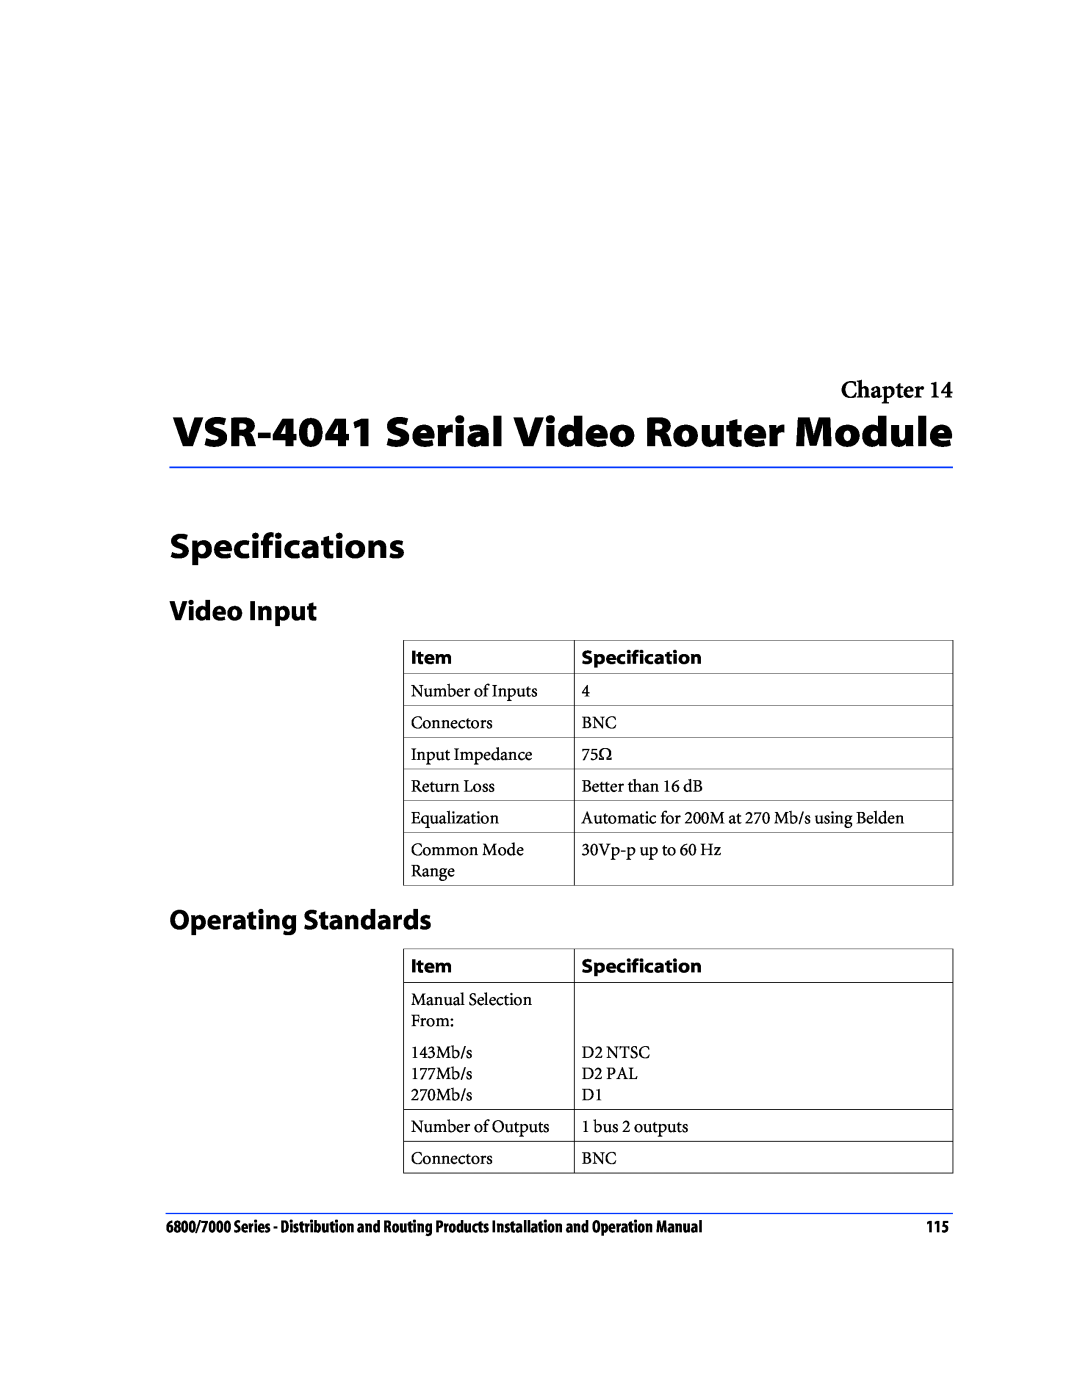 Nokia 6800 Series VSR-4041 Serial Video Router Module, Video Input, Operating Standards, Specifications, Chapter 